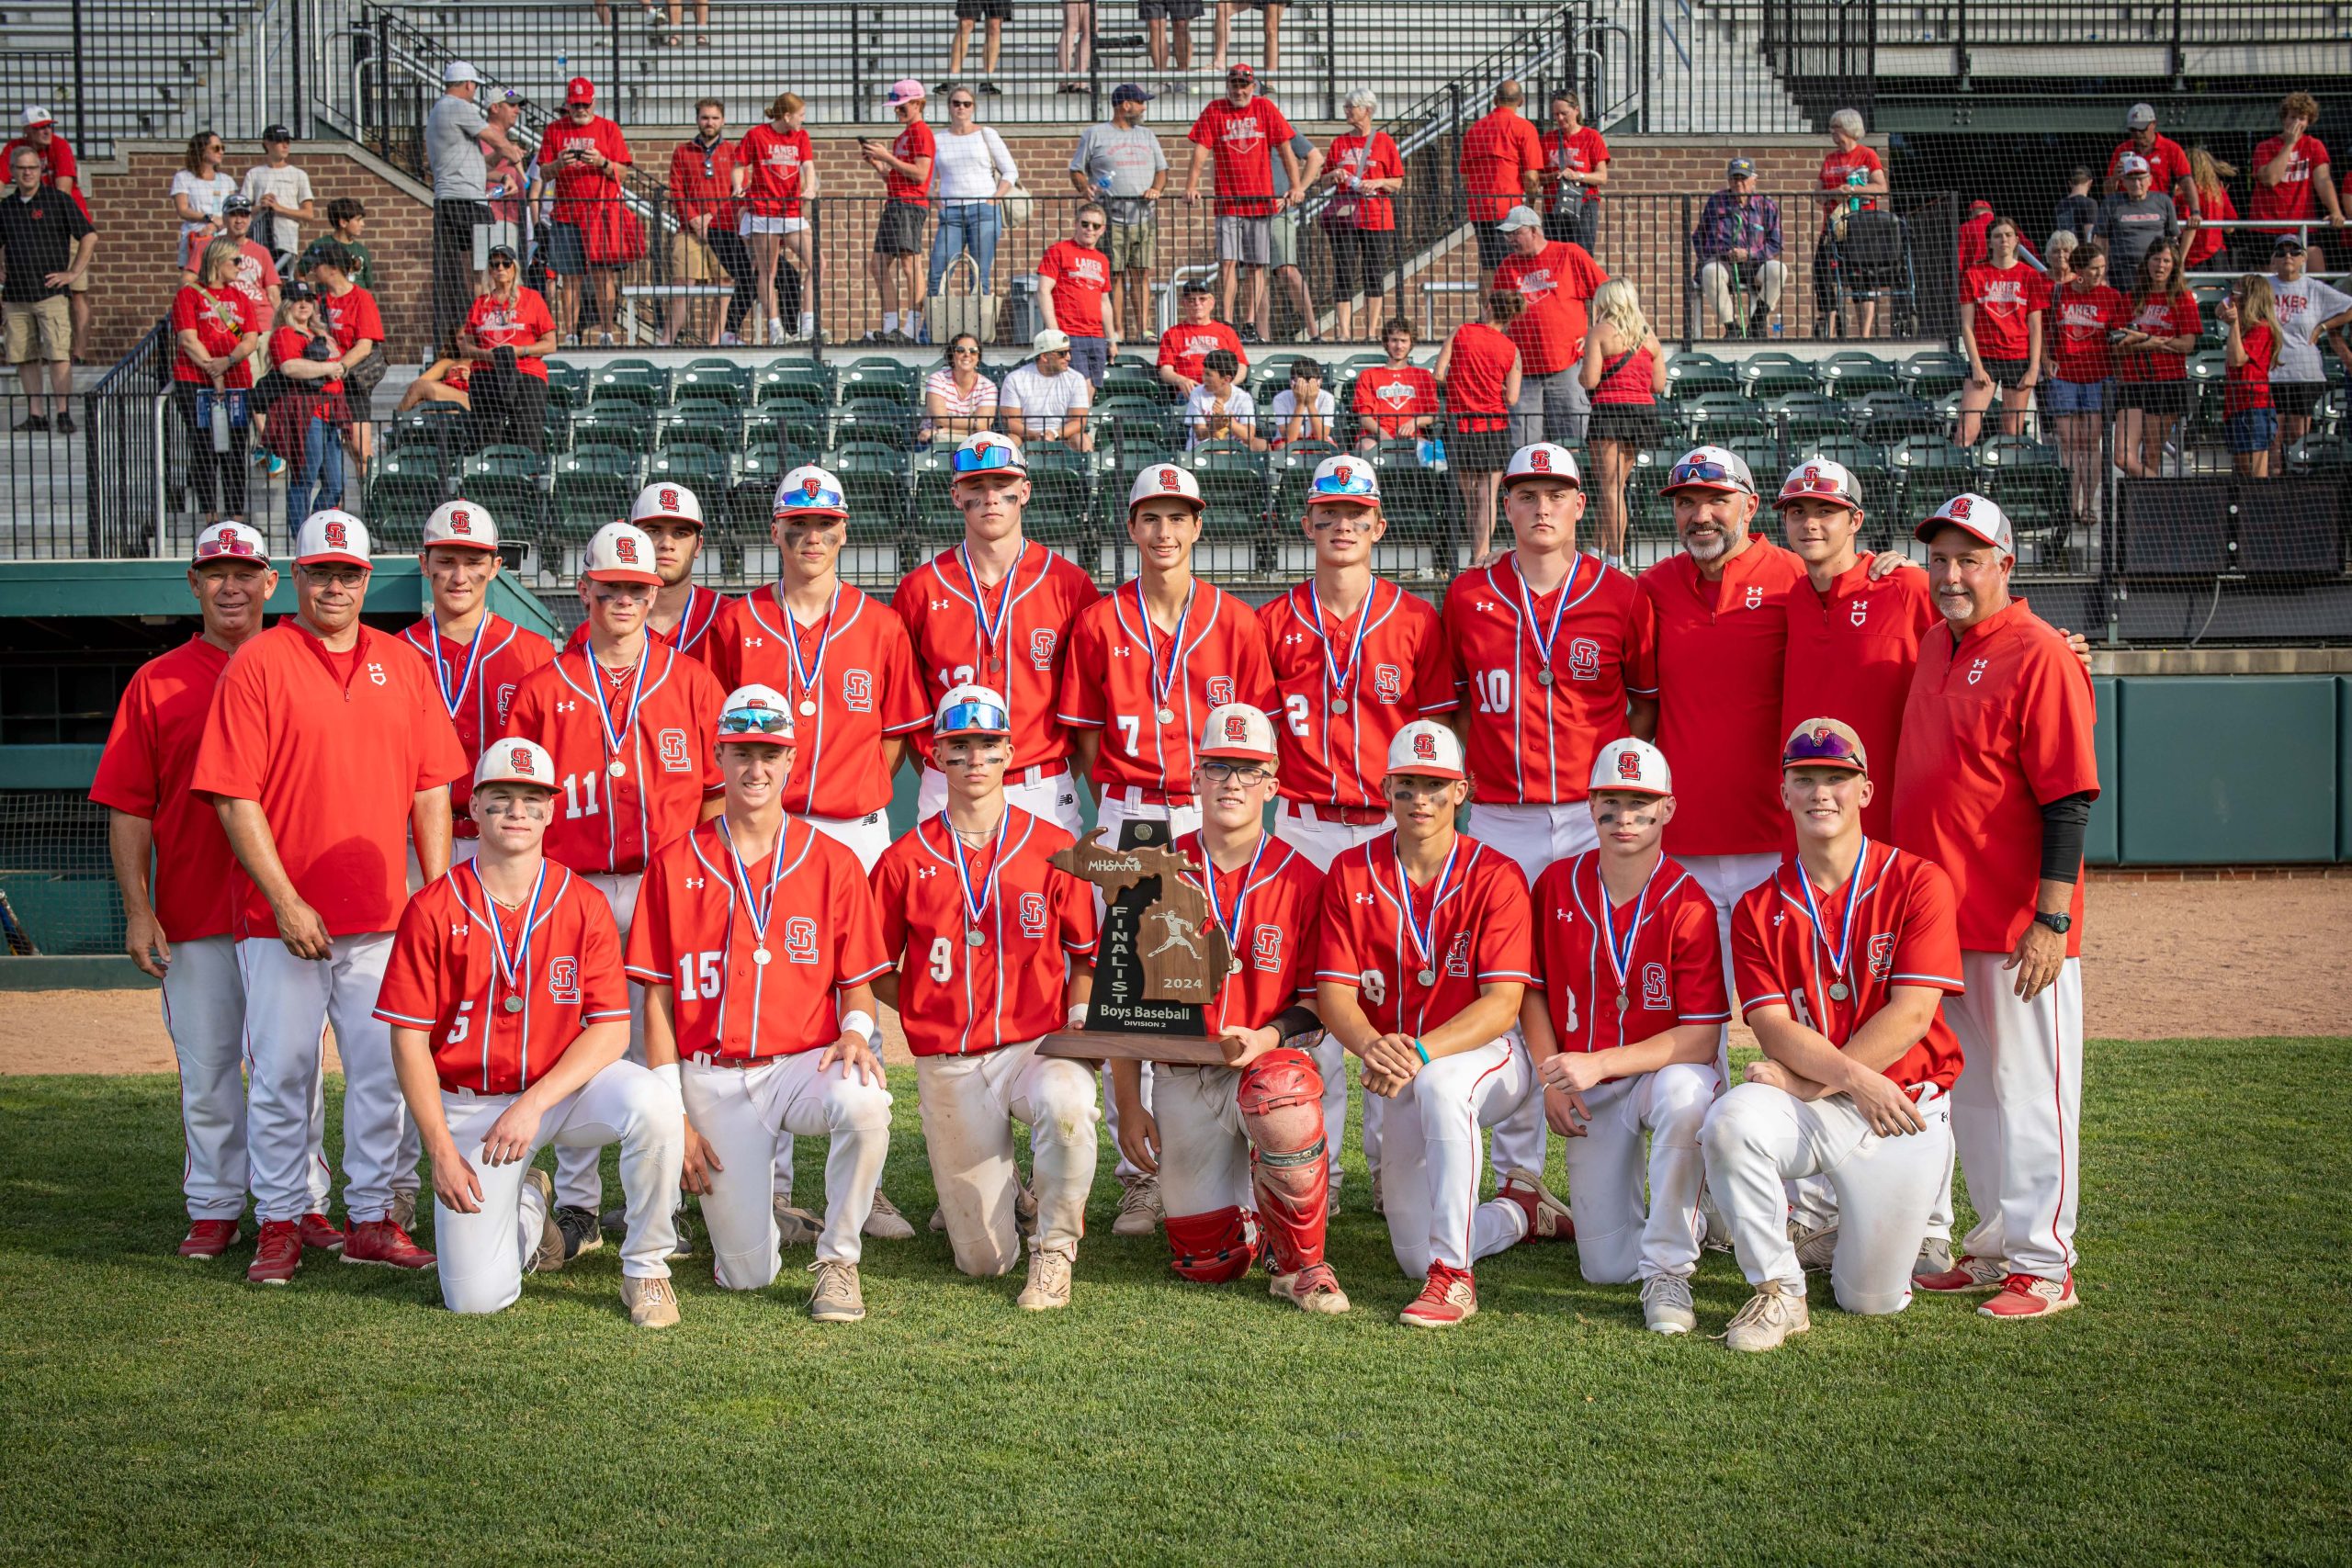 Spring Lake’s baseball run ends with shutout loss to Flint Powers Catholic in Division 2 title game